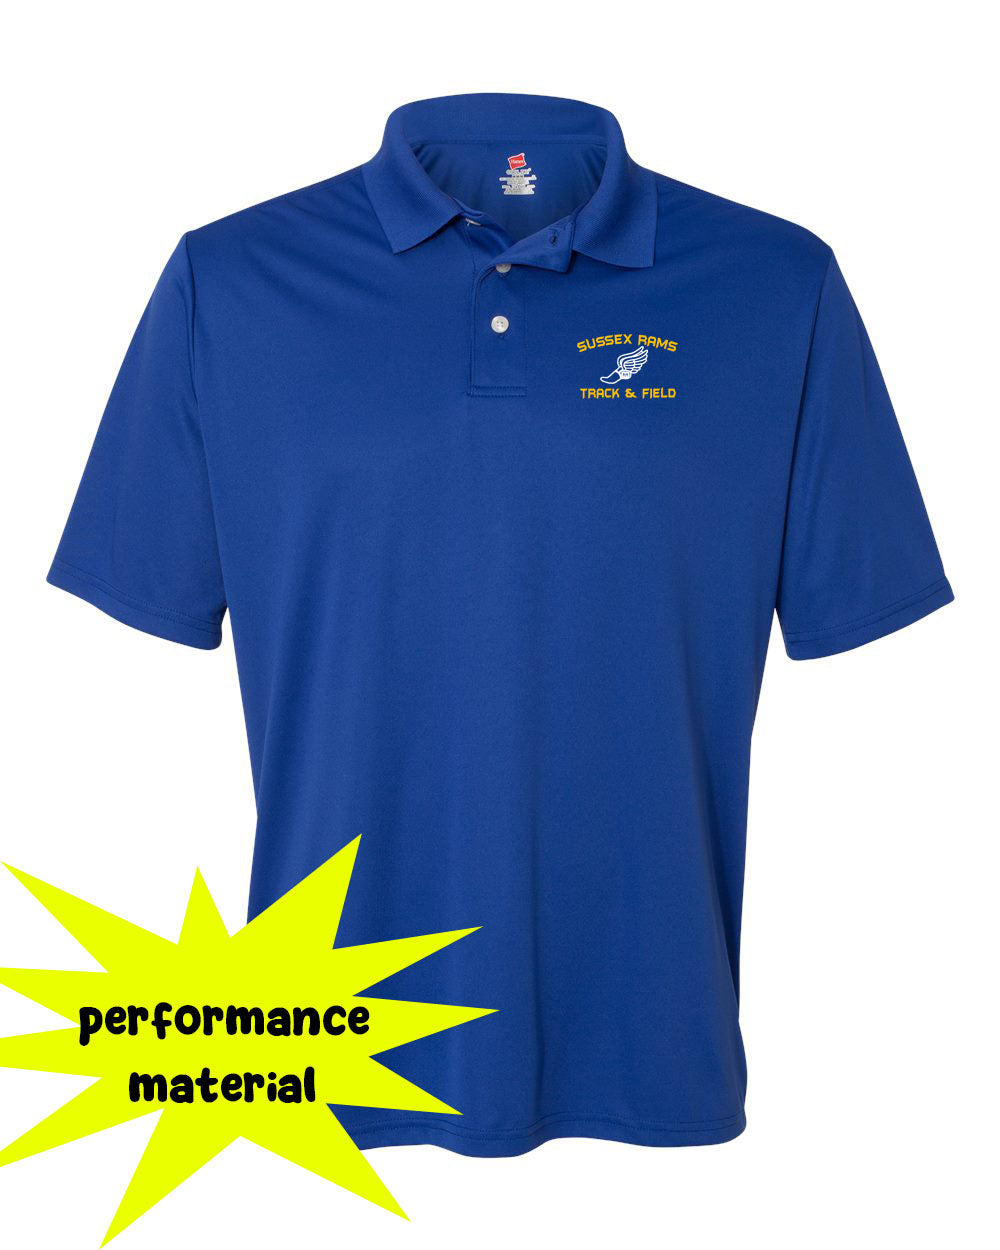 Sussex Rams Track Performance Material Polo T-Shirt Design 2